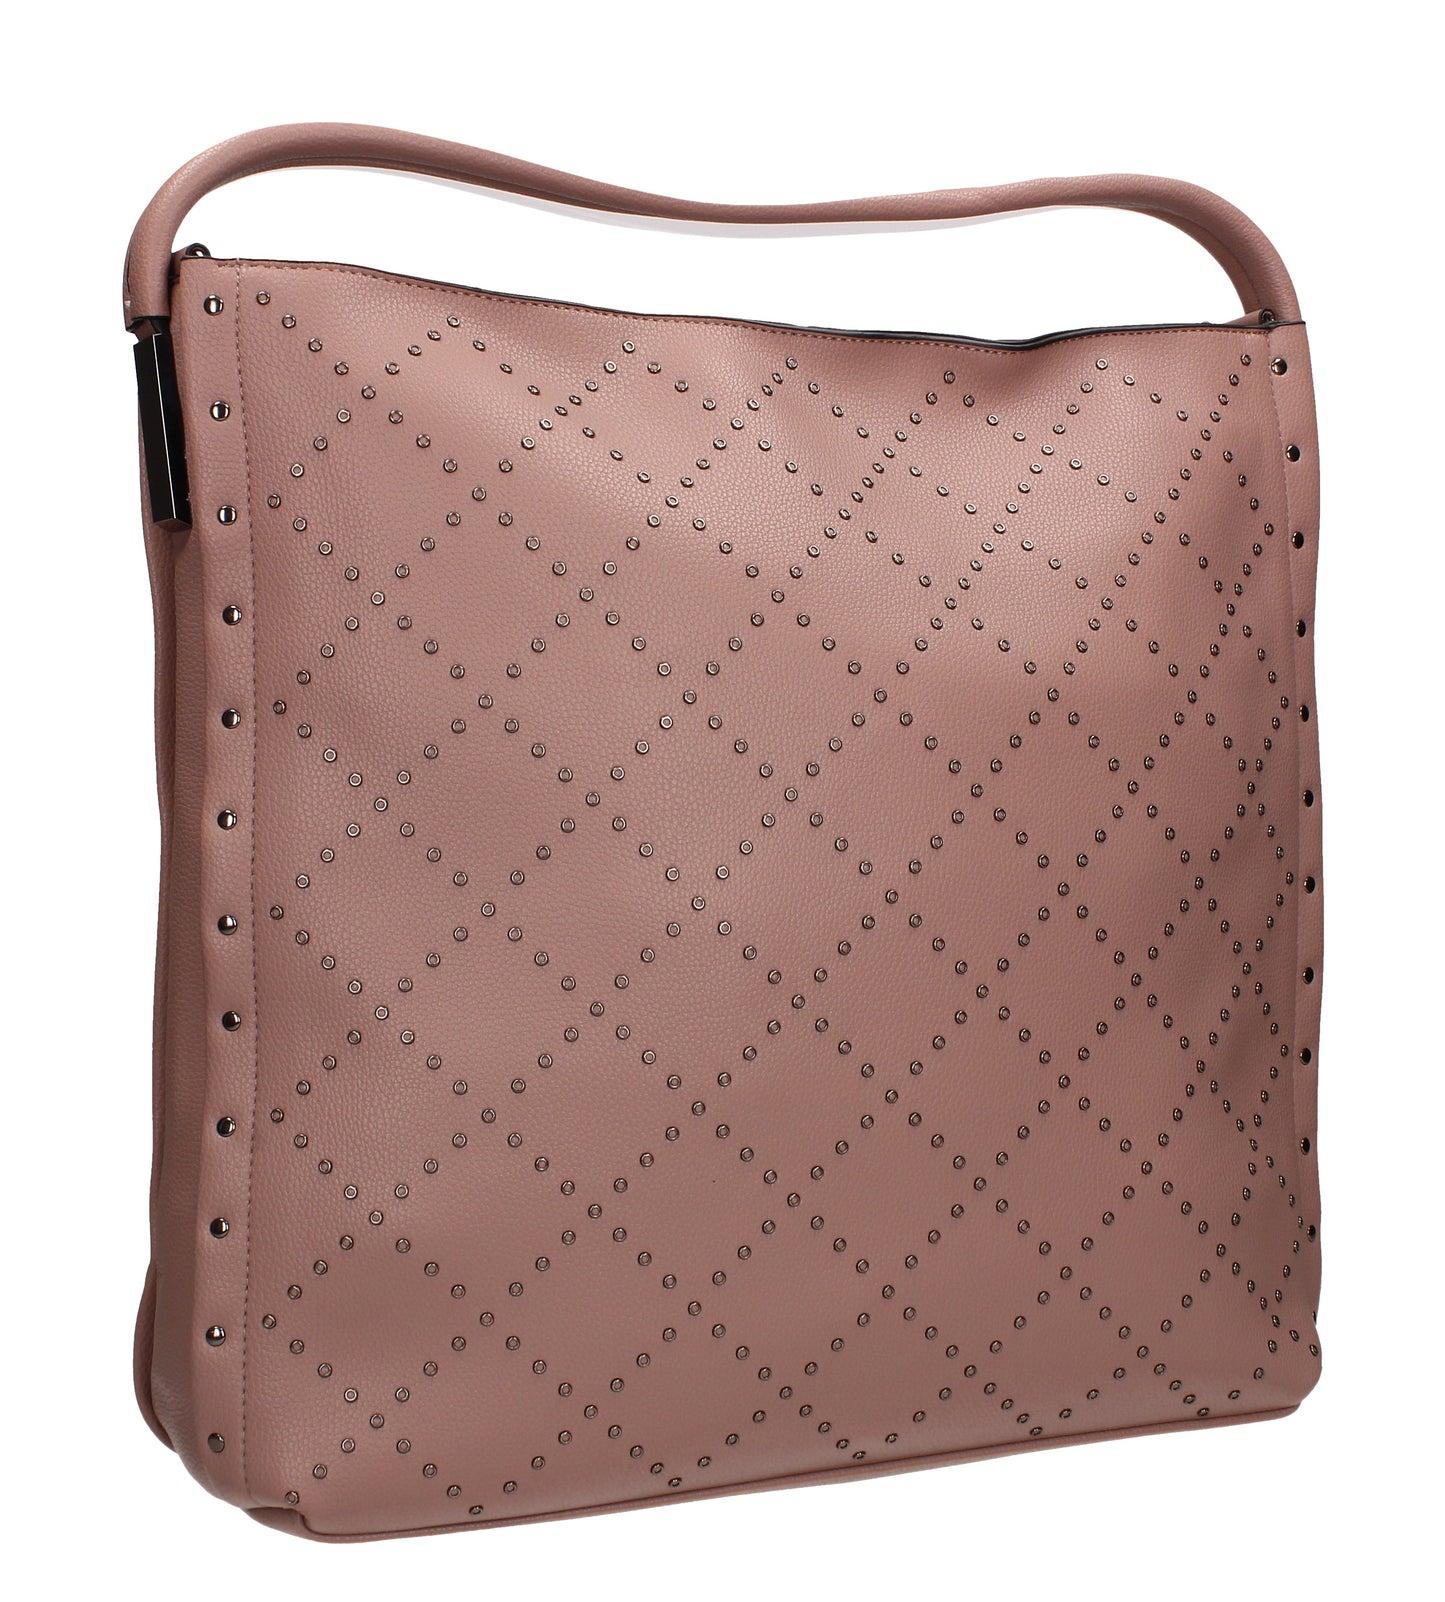 Buy your Alina Handbag Dark Pink Today! Buy with confidence from Swankyswans